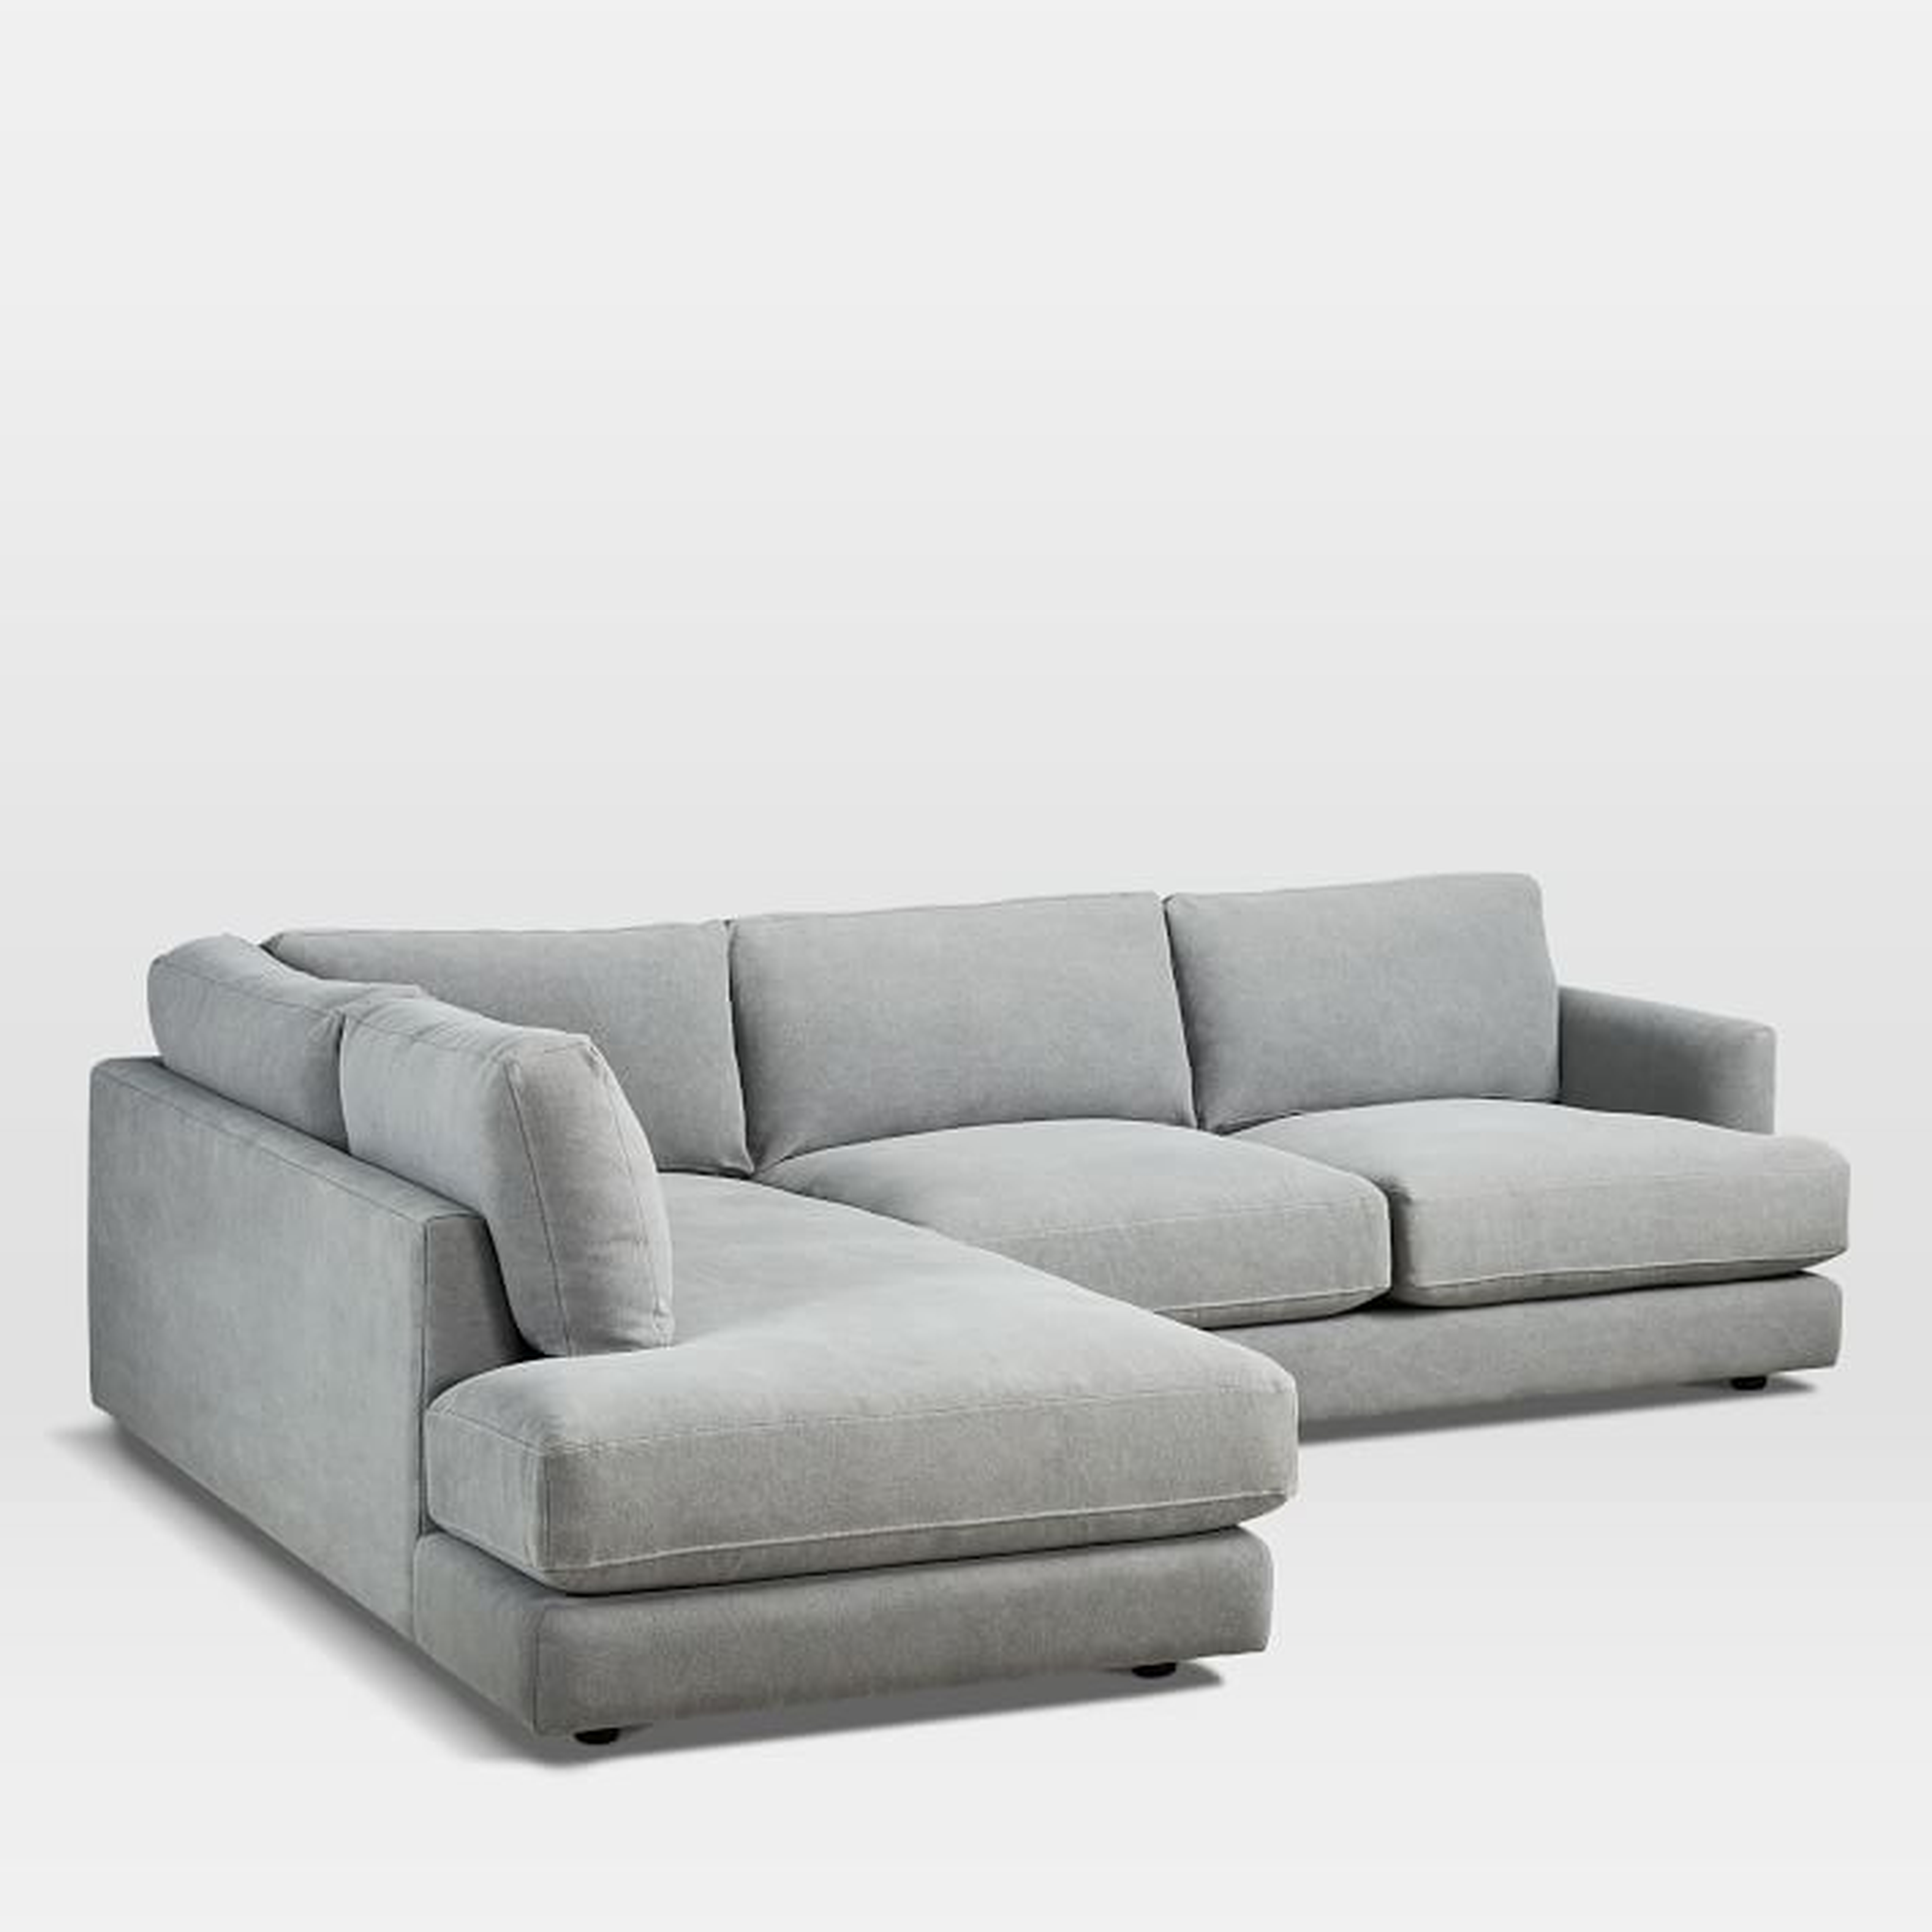 Haven Sectional Set 02: Right Arm Sofa, Left Arm Terminal Chaise, Performance Washed Canvas, Gray - West Elm